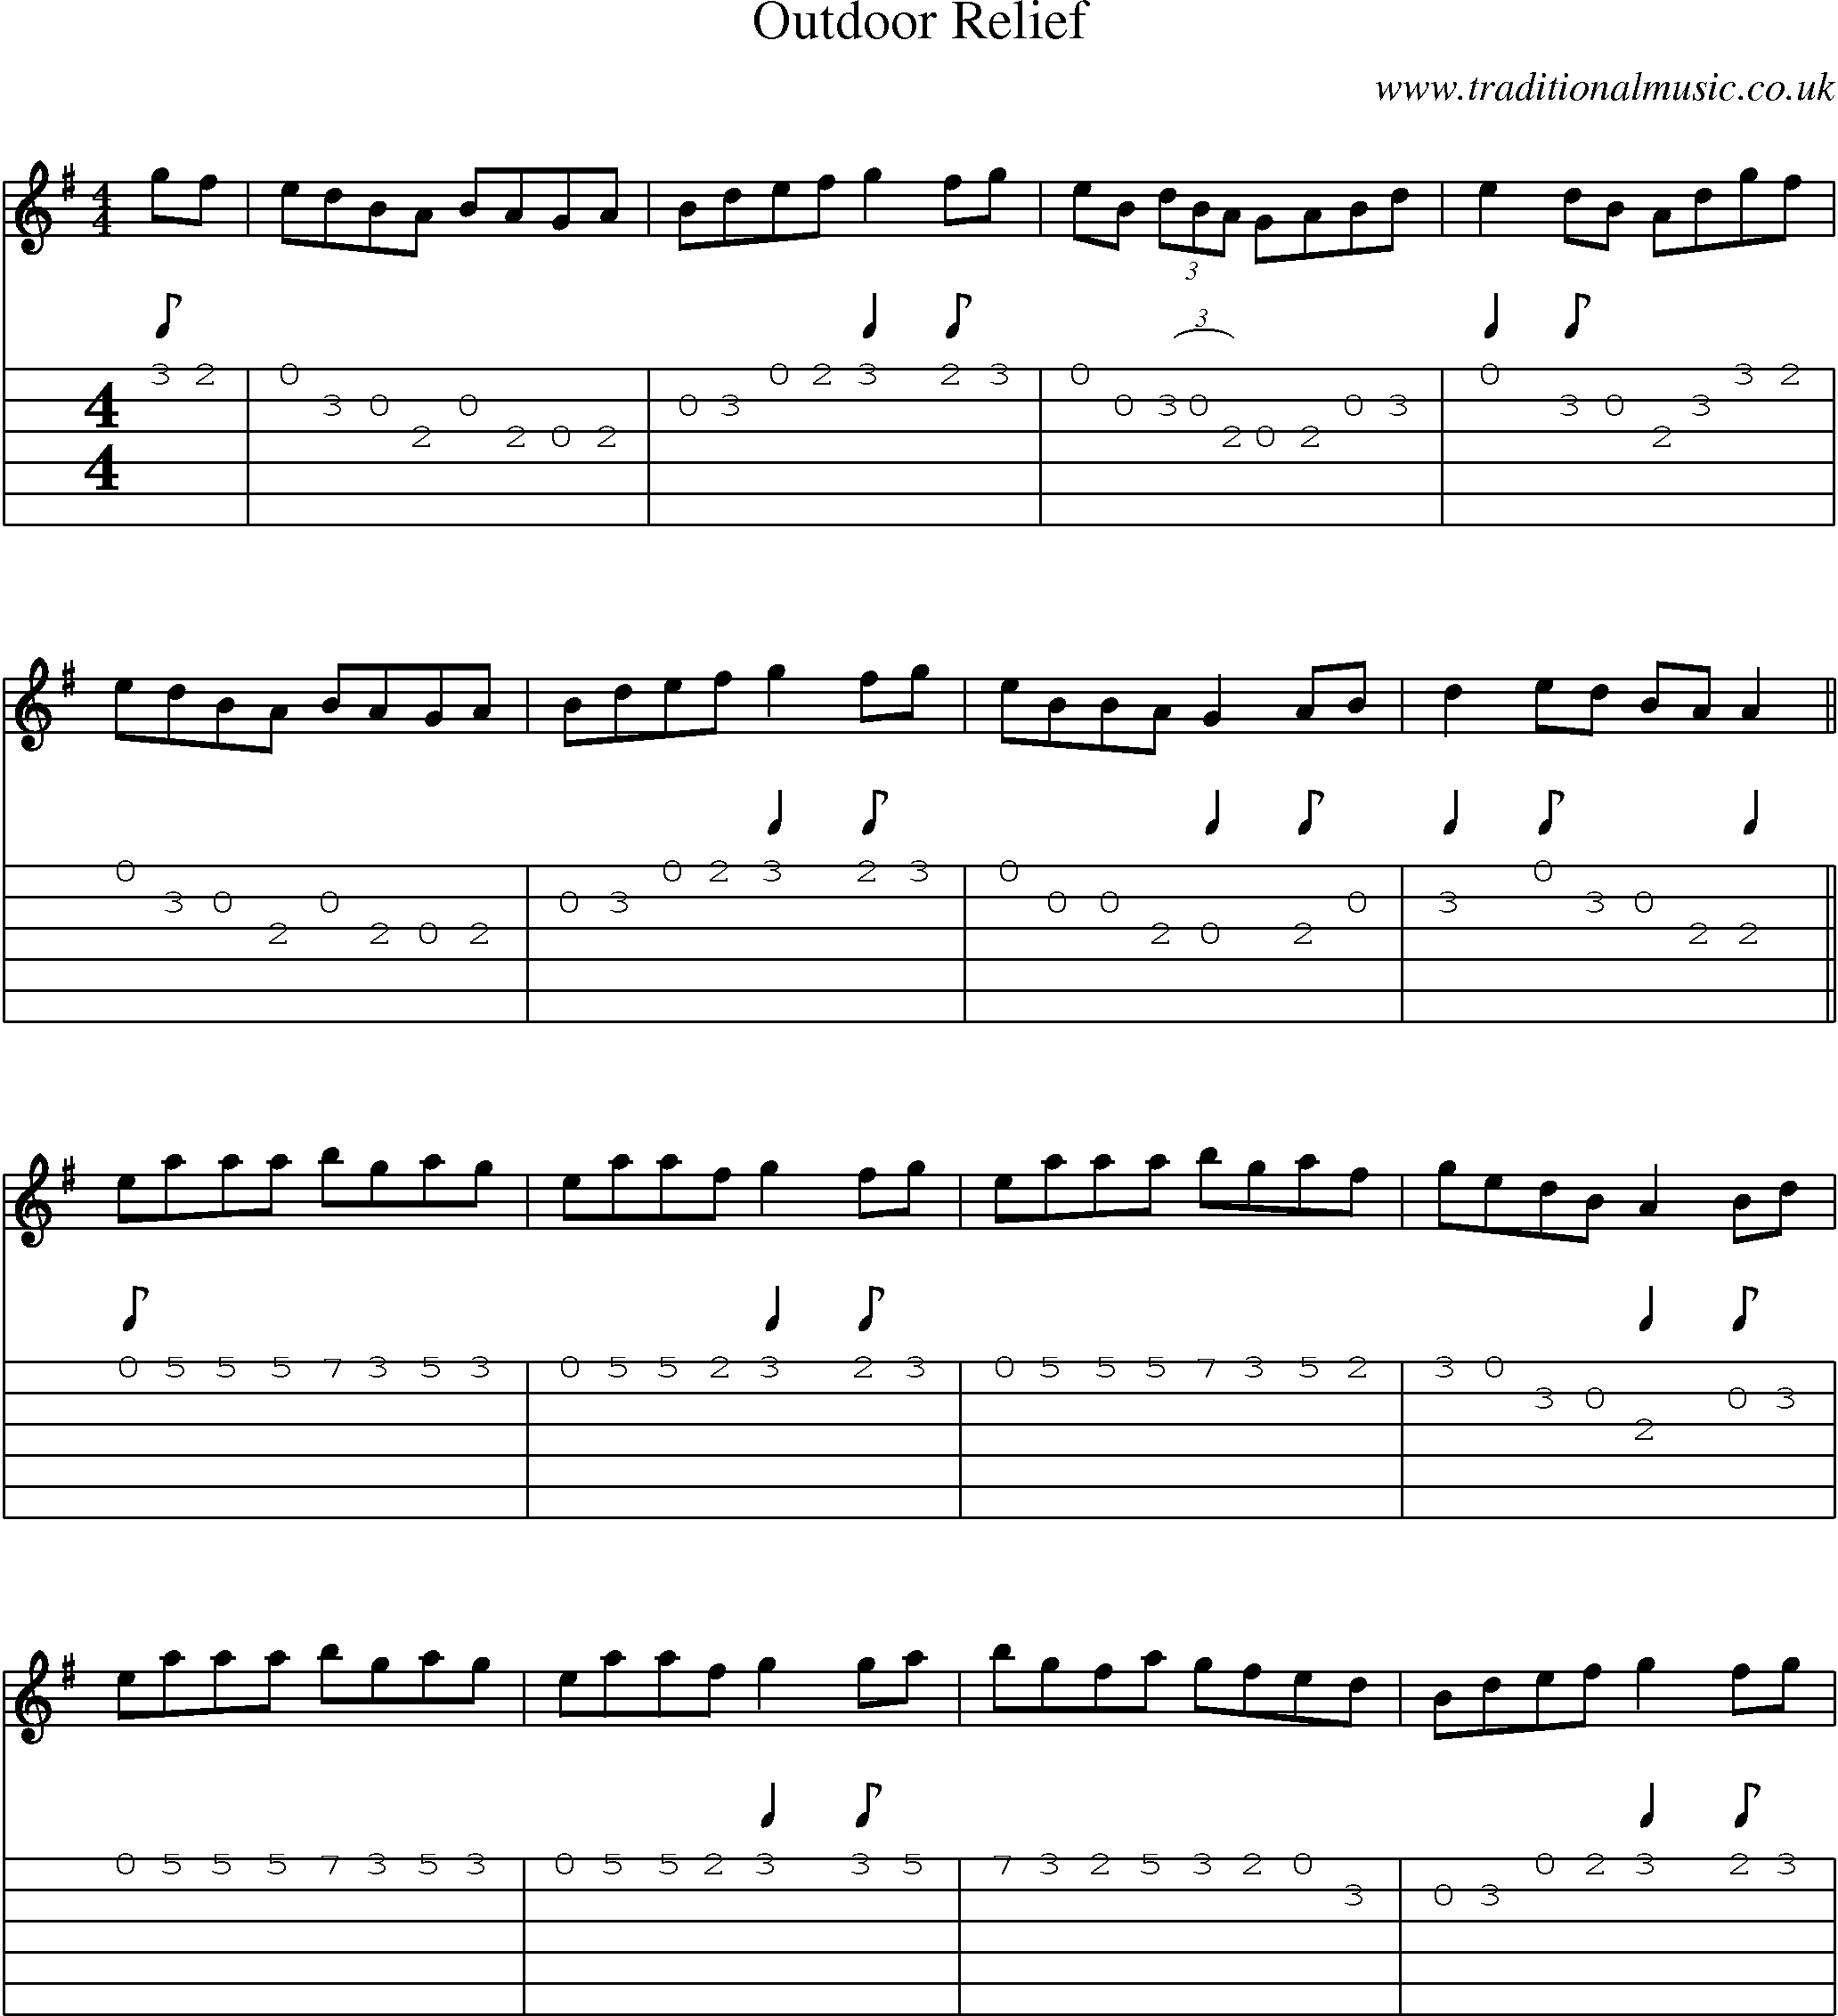 Music Score and Guitar Tabs for Outdoor Relief